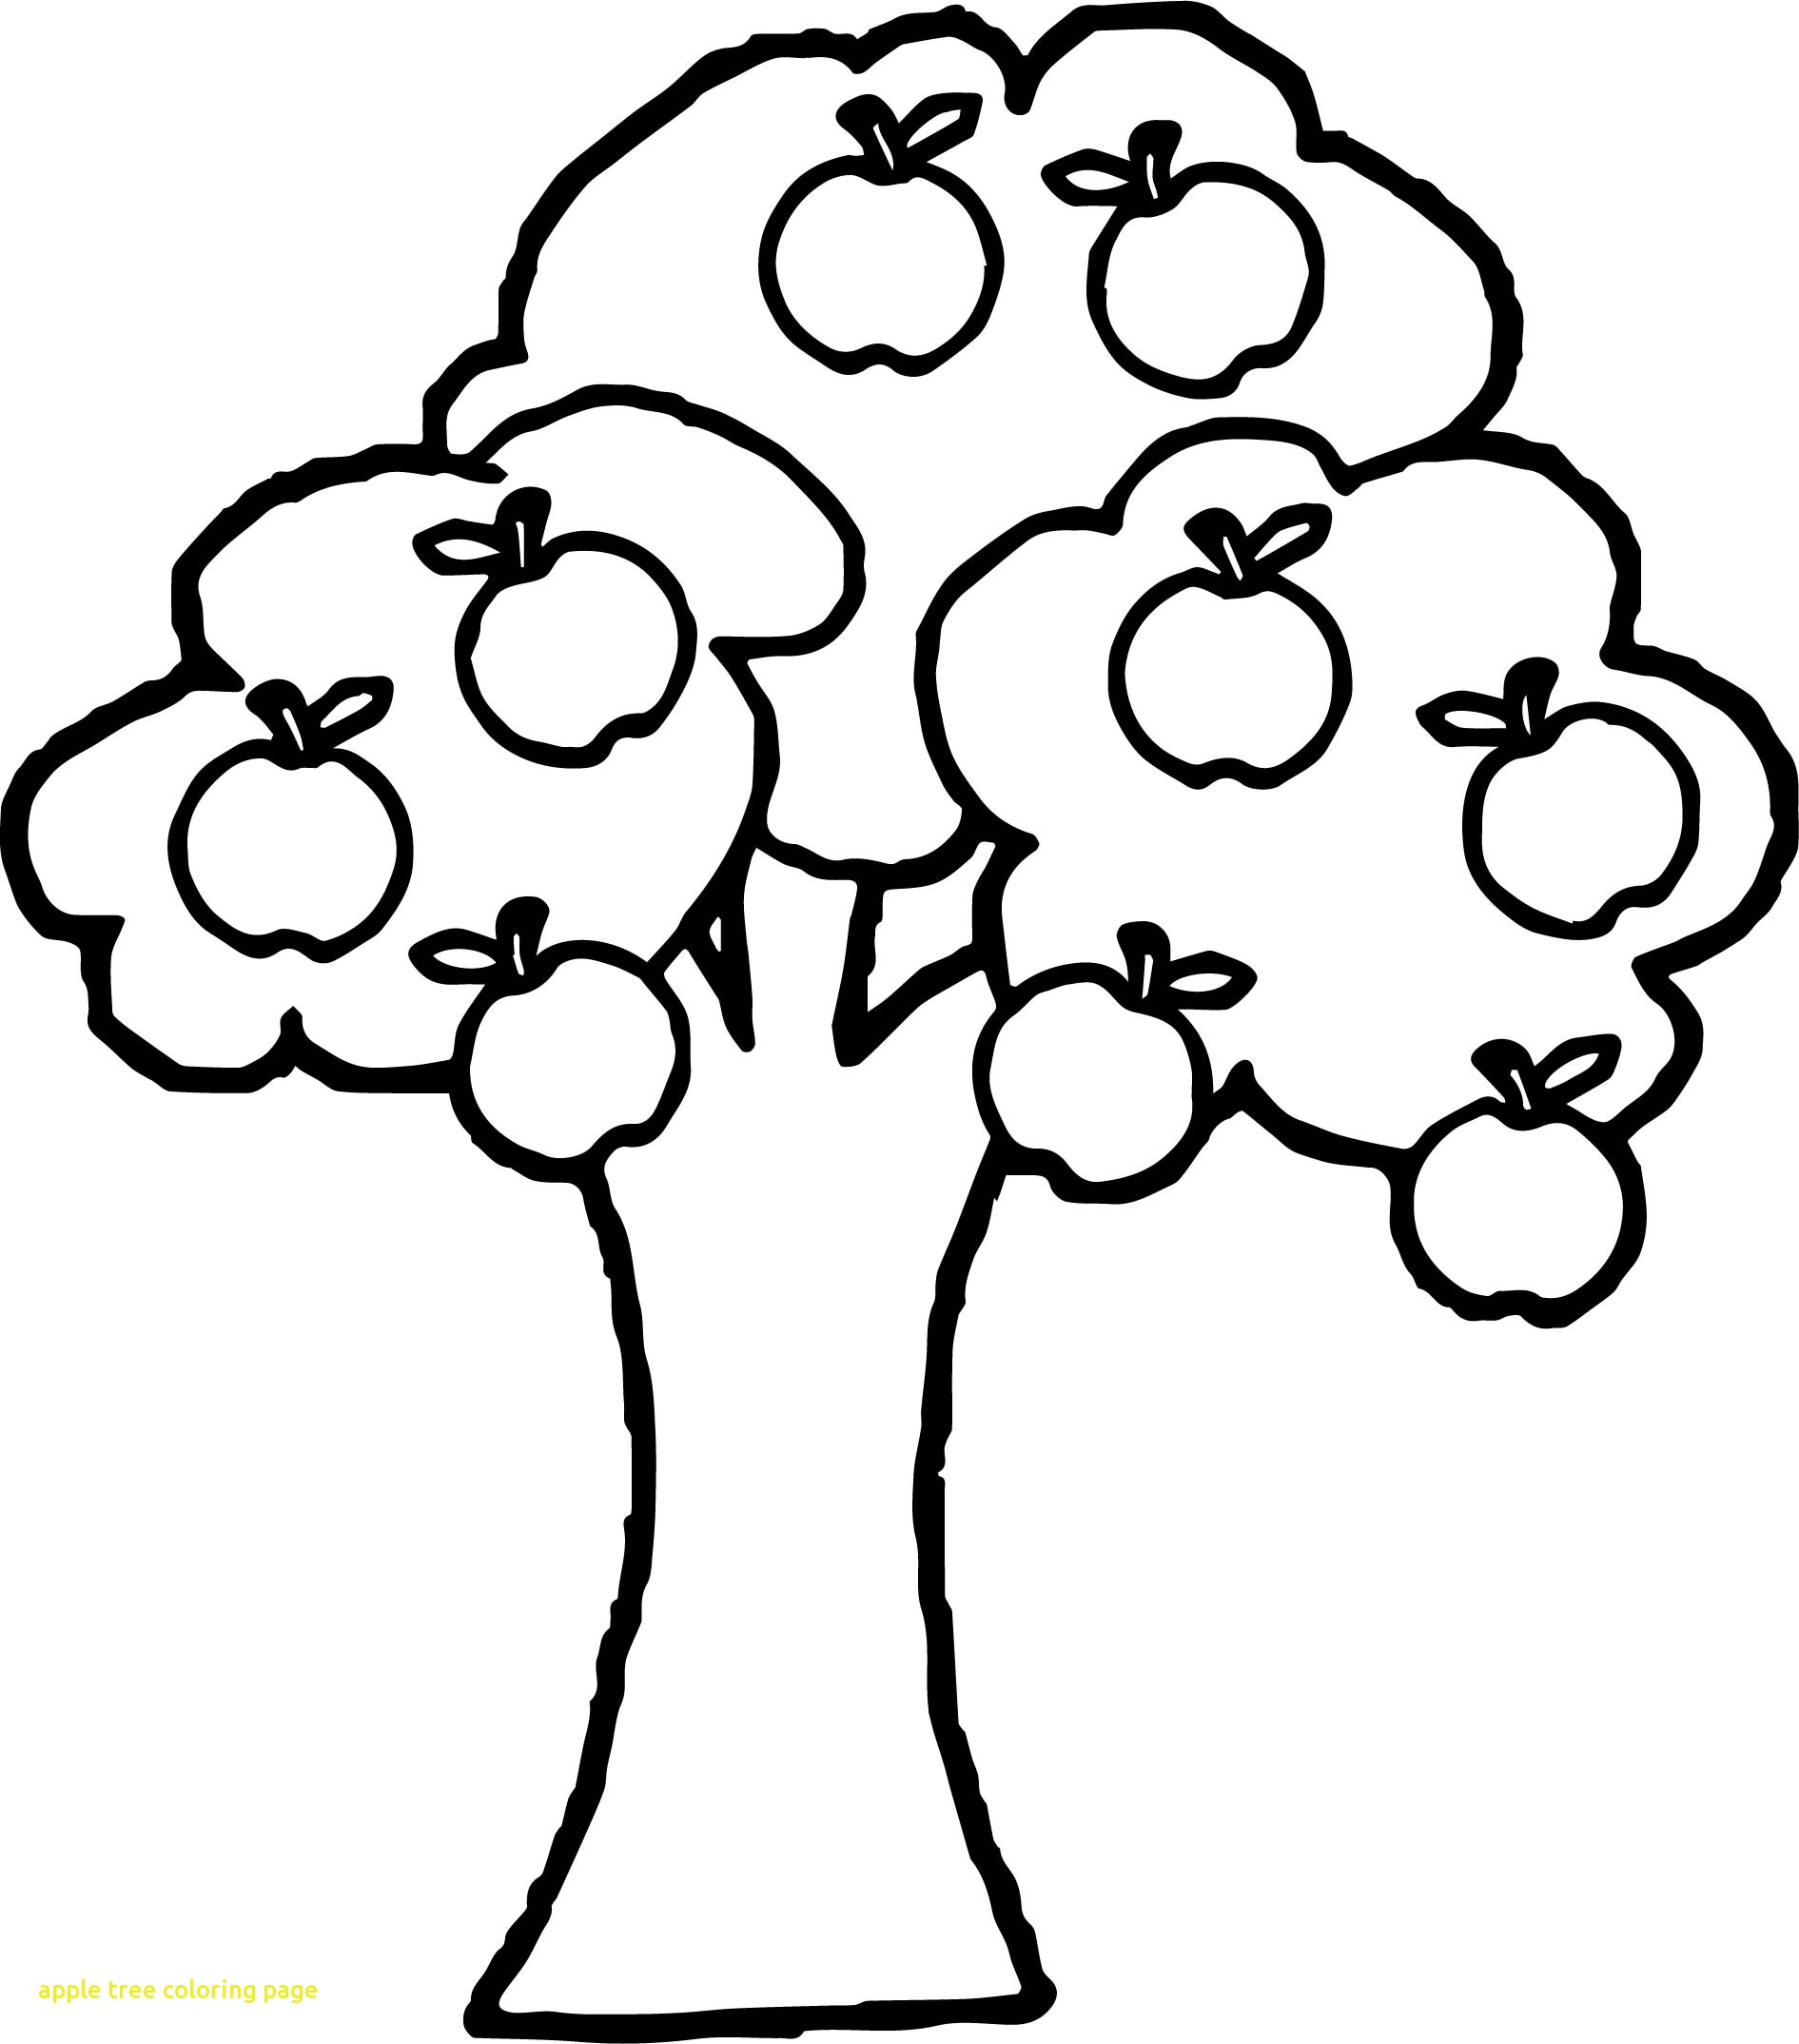 free-printable-apple-tree-coloring-pages-printable-templates